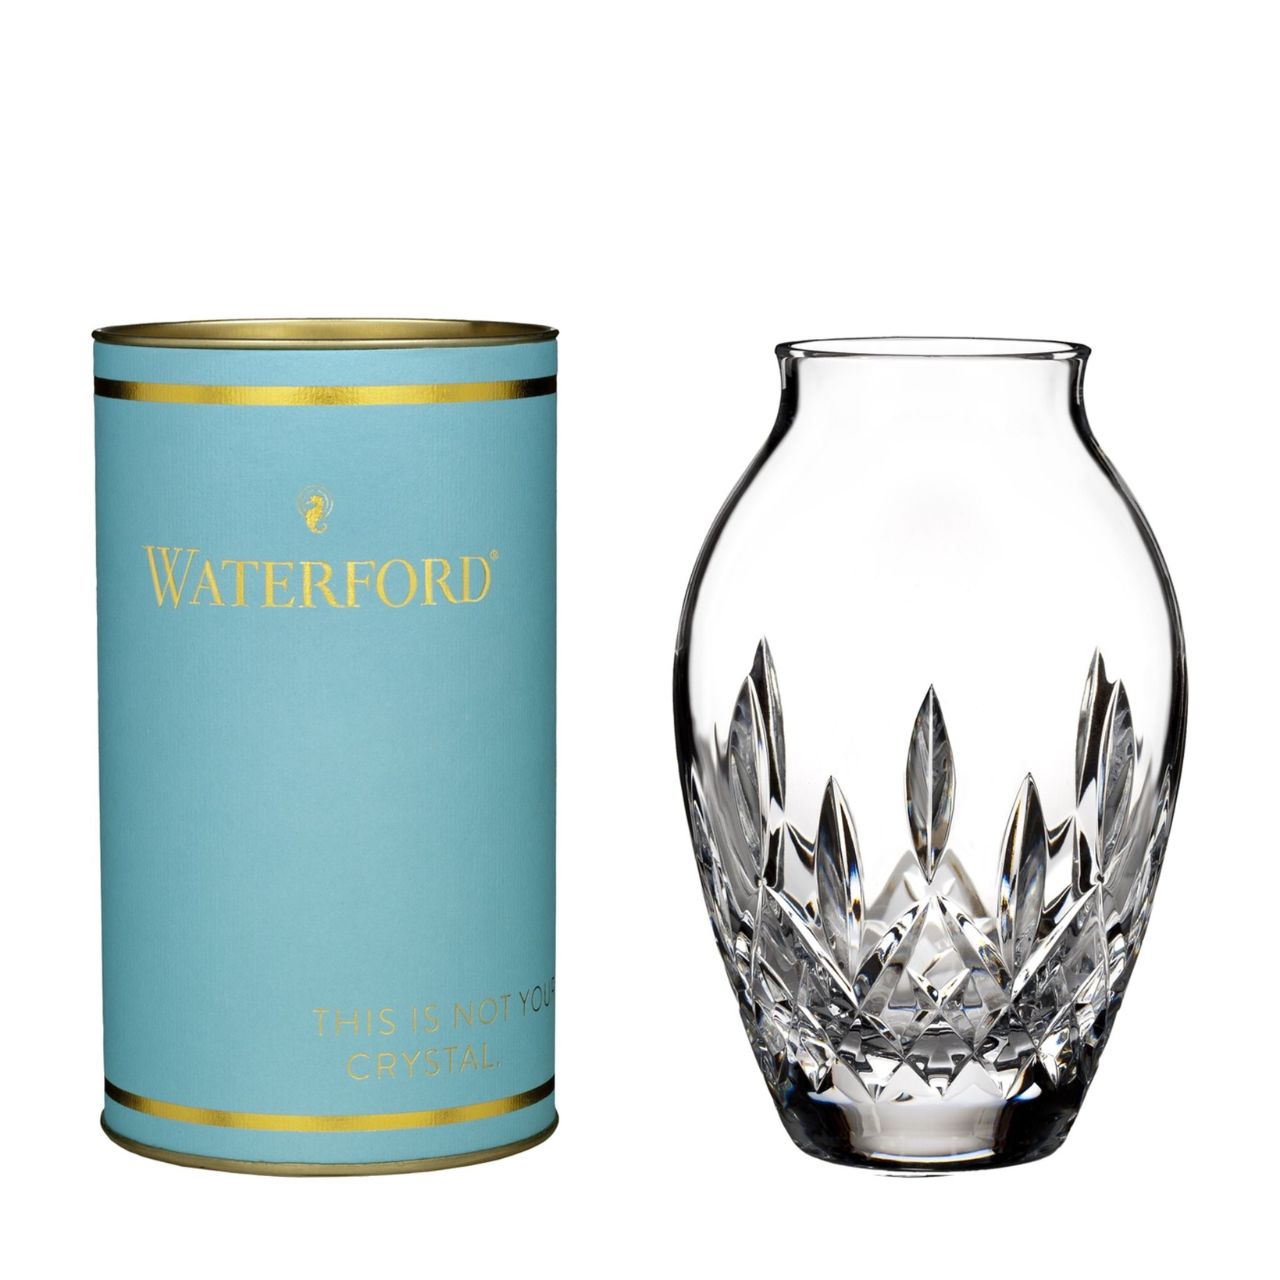 Giftology Lismore Candy 13cm Bud Vase by Waterford  The Giftology collection features Waterford's best crystal gifts in compelling gift boxes designed in 5 different eye-catching colour schemes with opulent gold touches. We think of Giftology as the science of gift giving in a fast paced world.